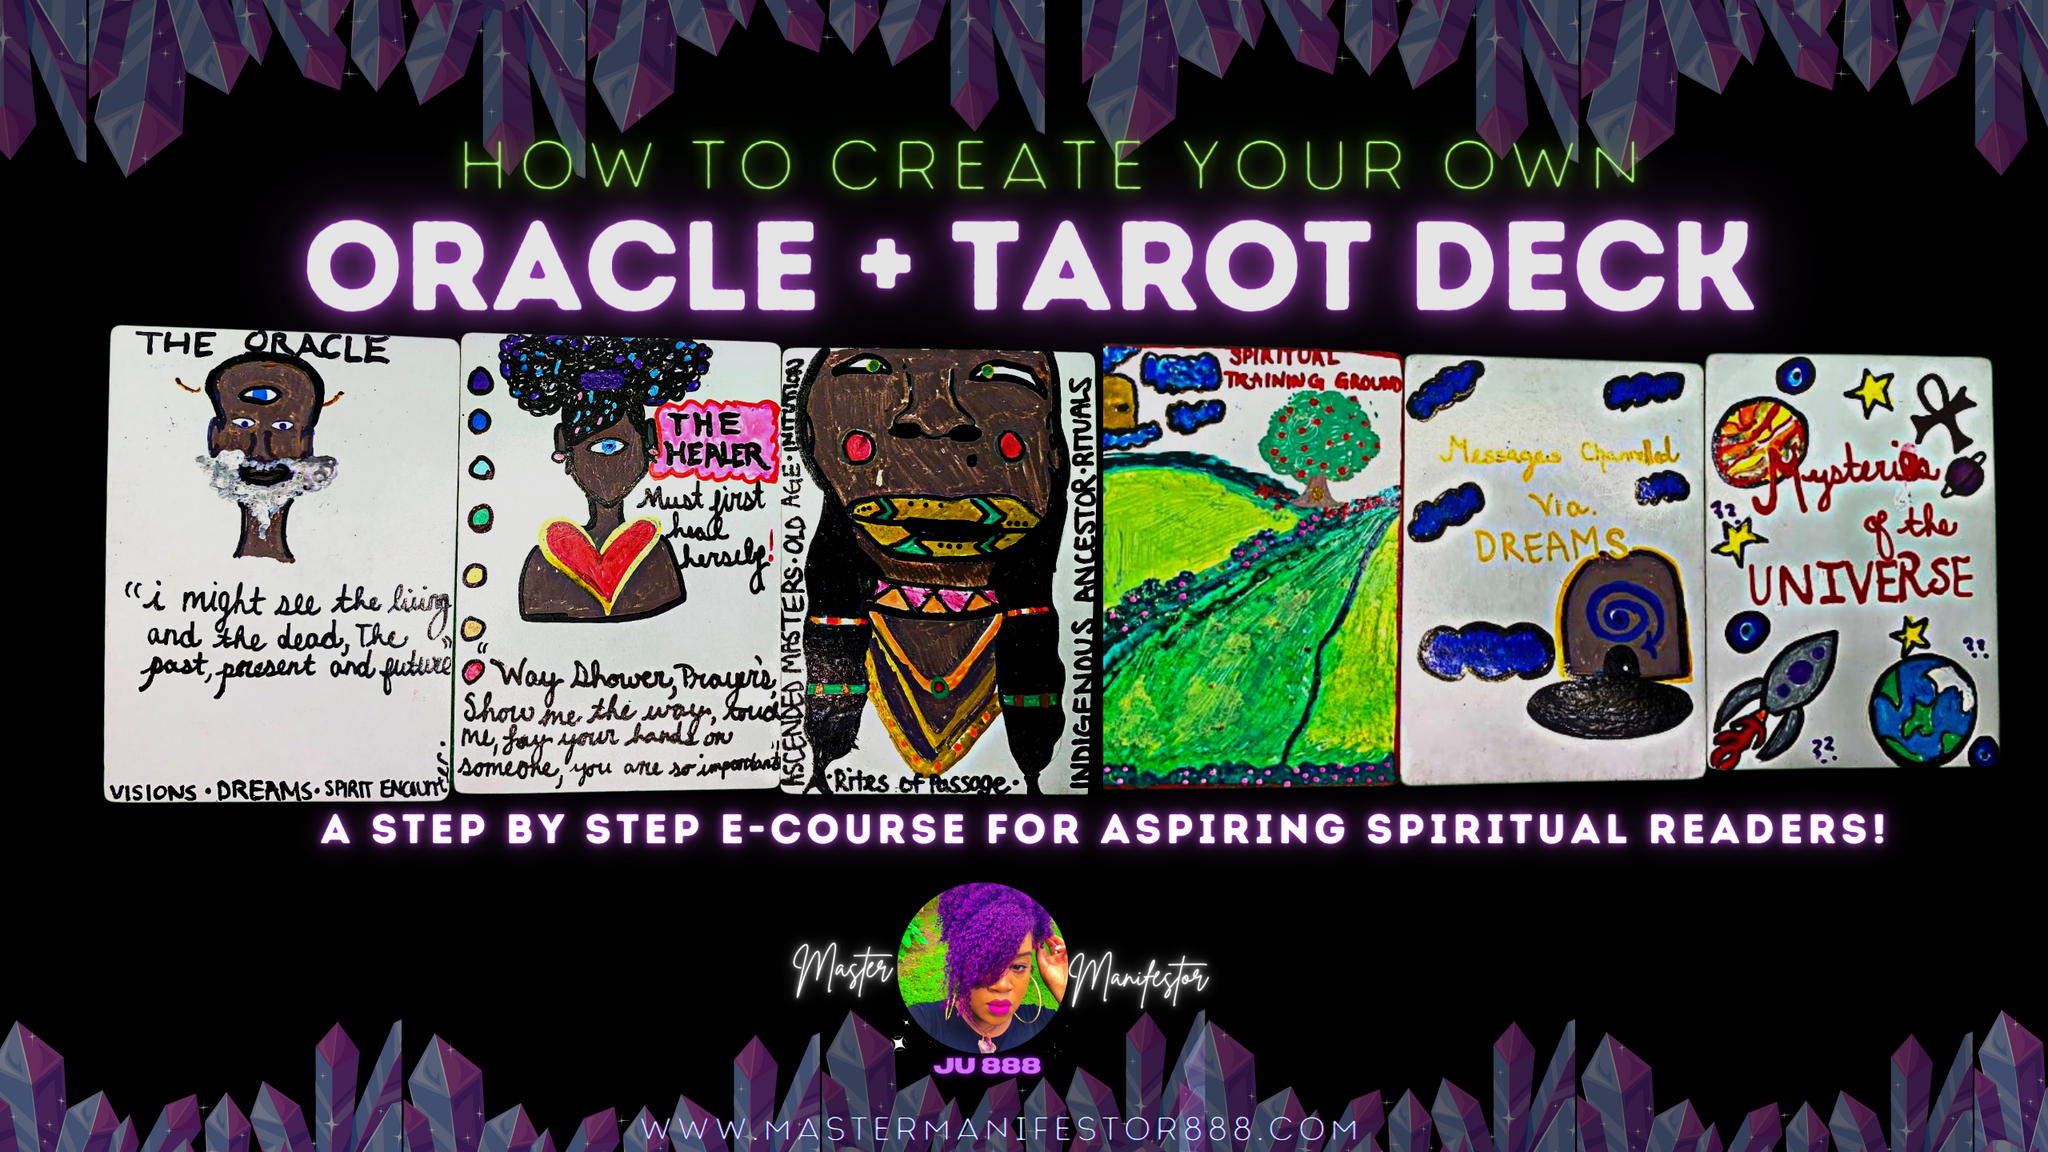 How to Create Your Own Oracle/ Tarot Deck (E-COURSE)